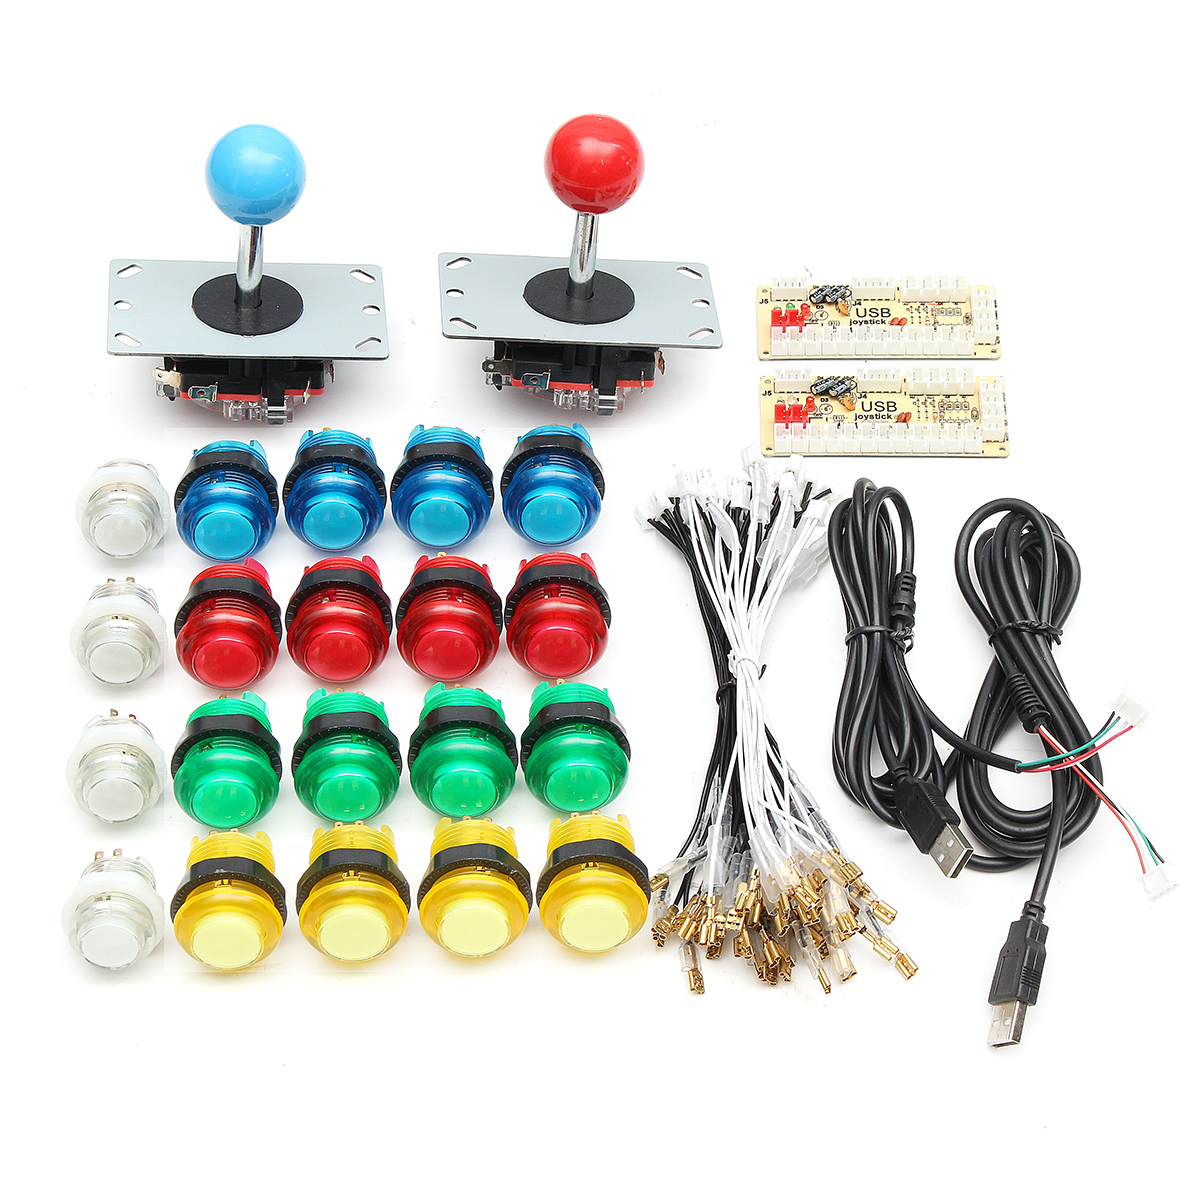 

Full Colors Switch Buttons 2 USB Encoder 2 Joysticks DIY Kit Blue Red for Acarde Game Controller